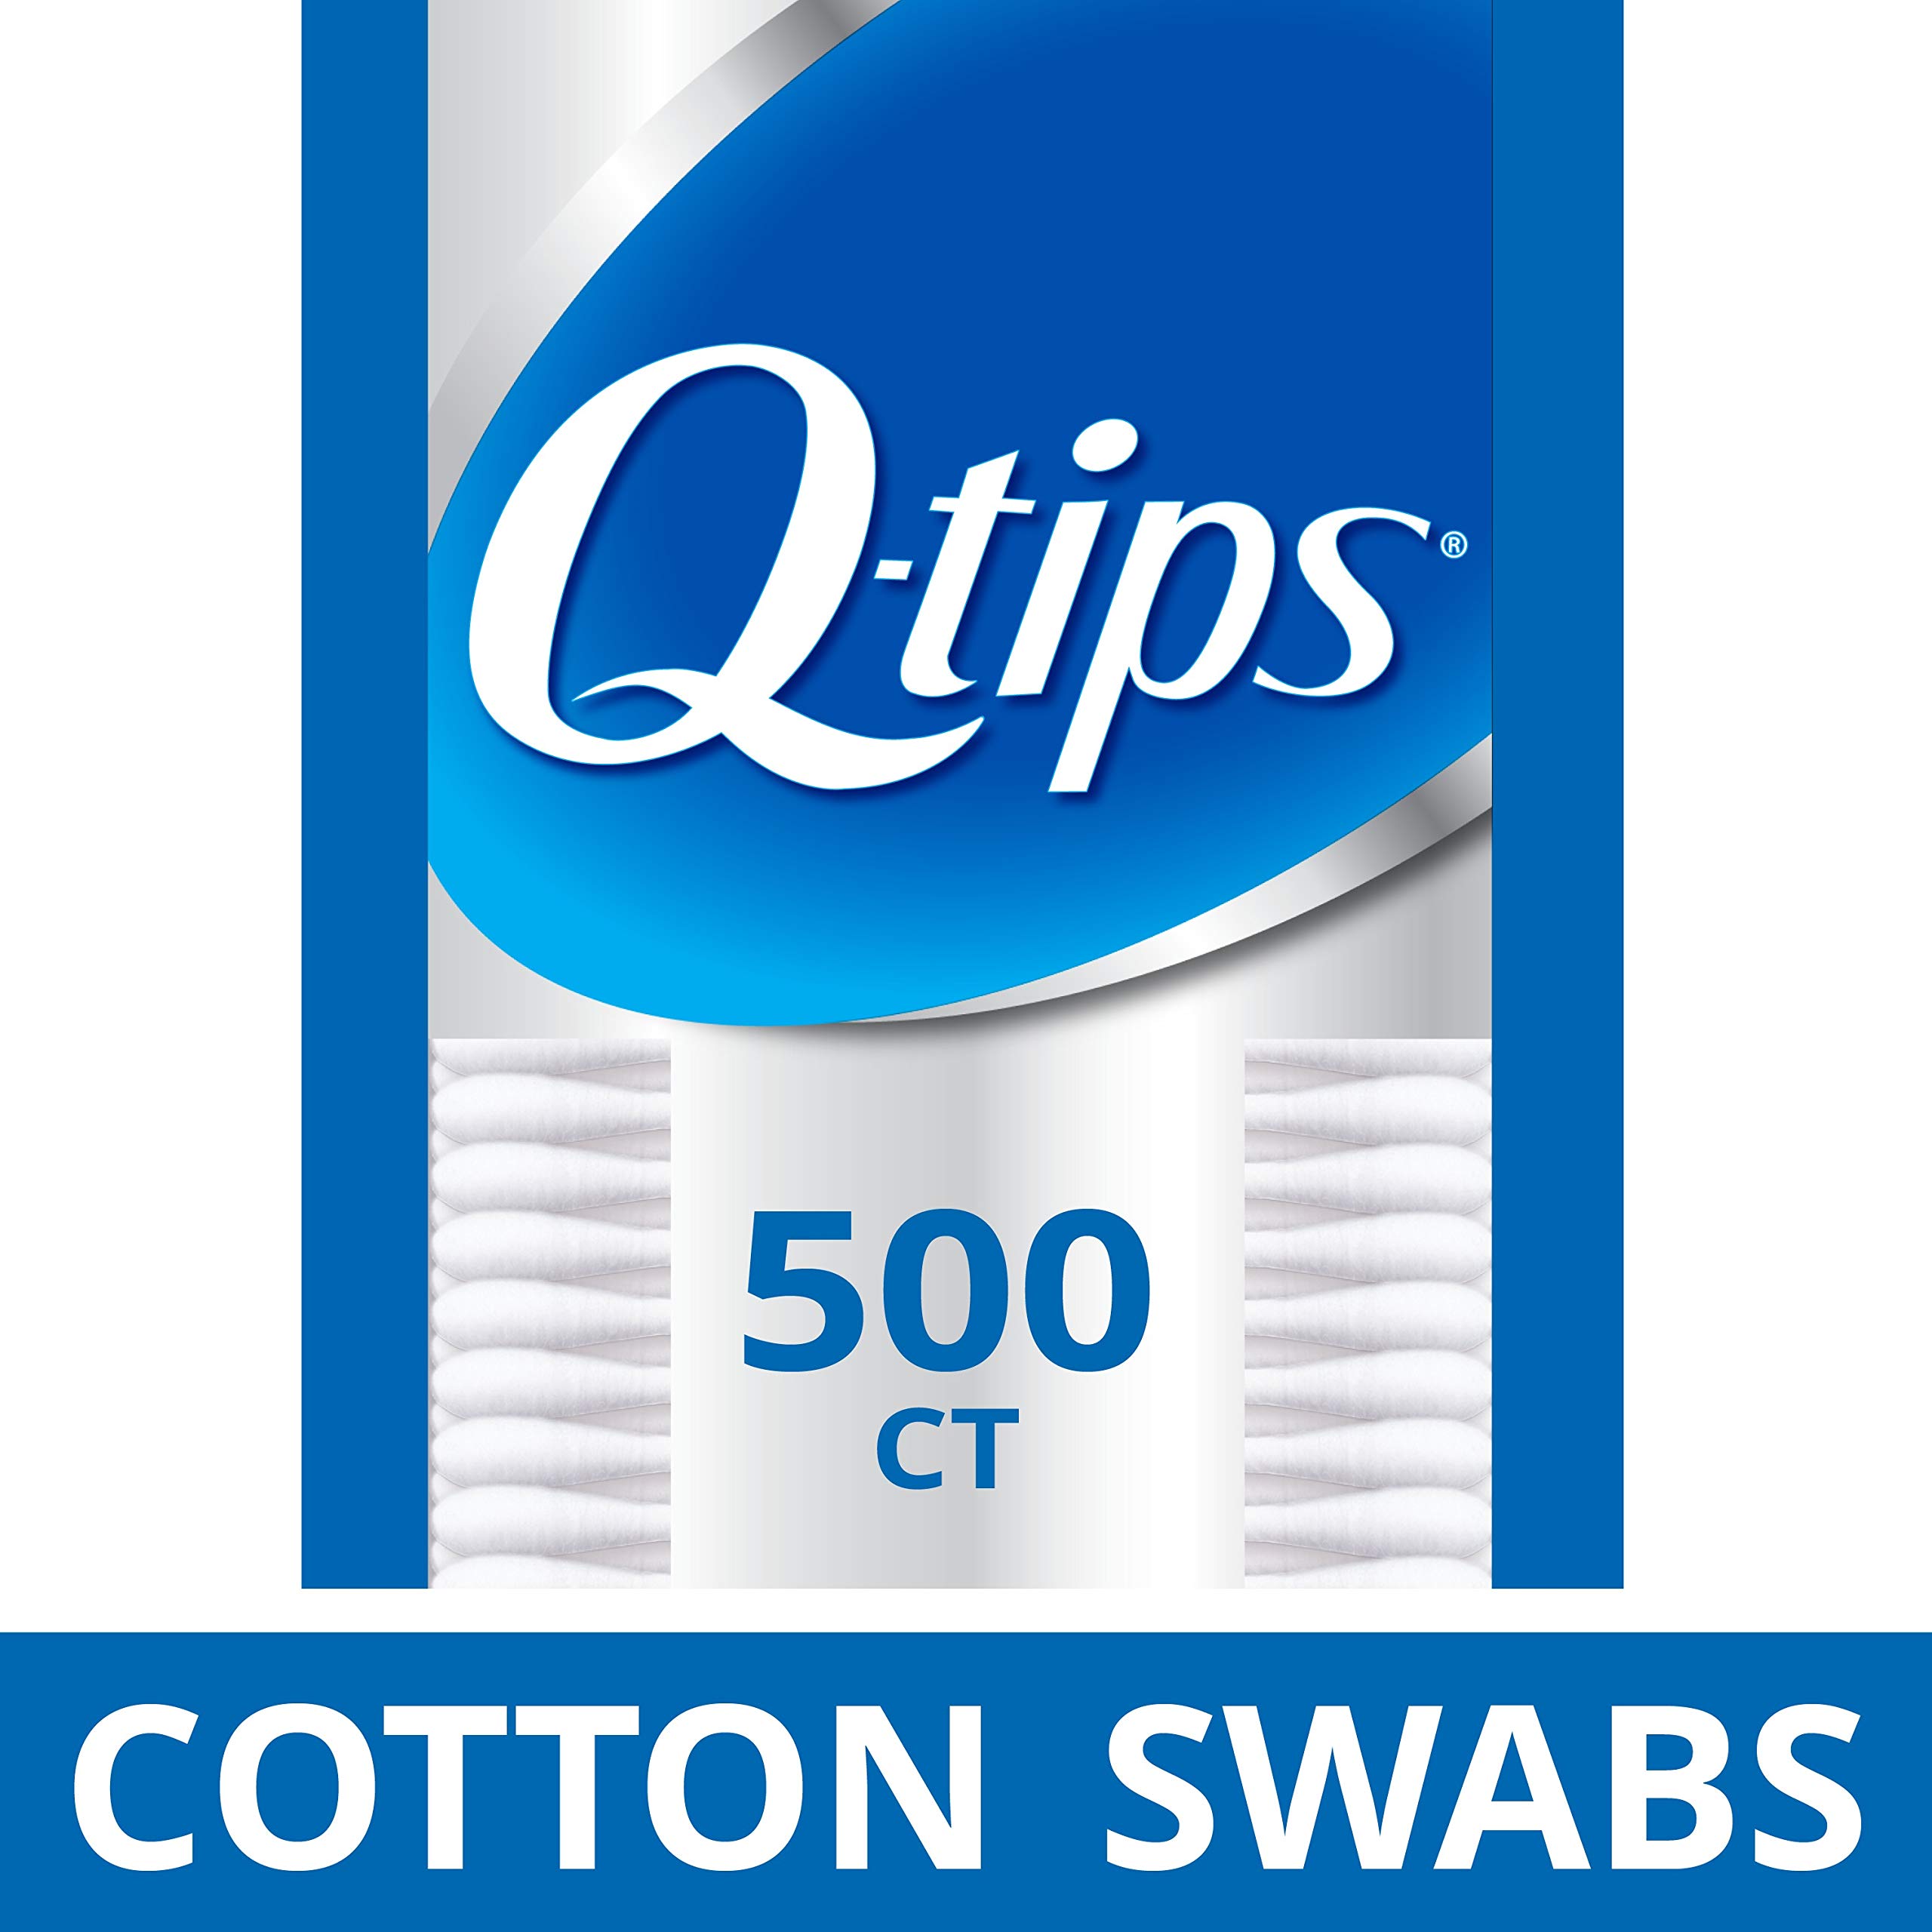 Q-Tips Cotton Swabs, 500 Count, (Pack of 2) - image 2 of 7